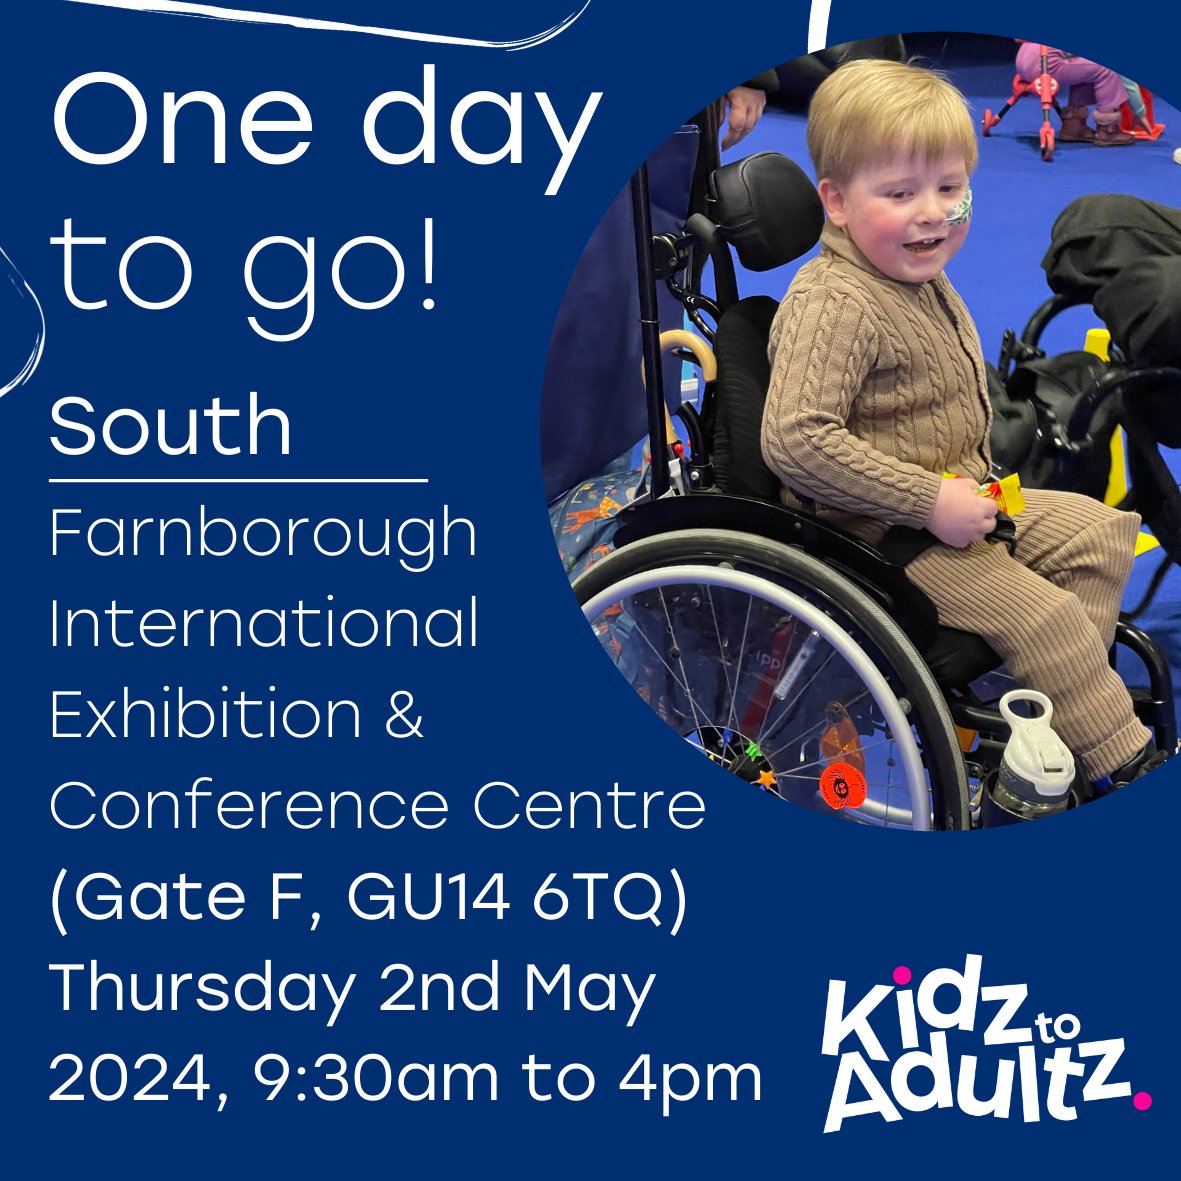 Make sure to pick up a copy of Enable Magazine at the @kidztoadultz South event tomorrow at the Farnborough International Exhibition and Conference Centre. Register for free here: lnkd.in/gdbrrpf2